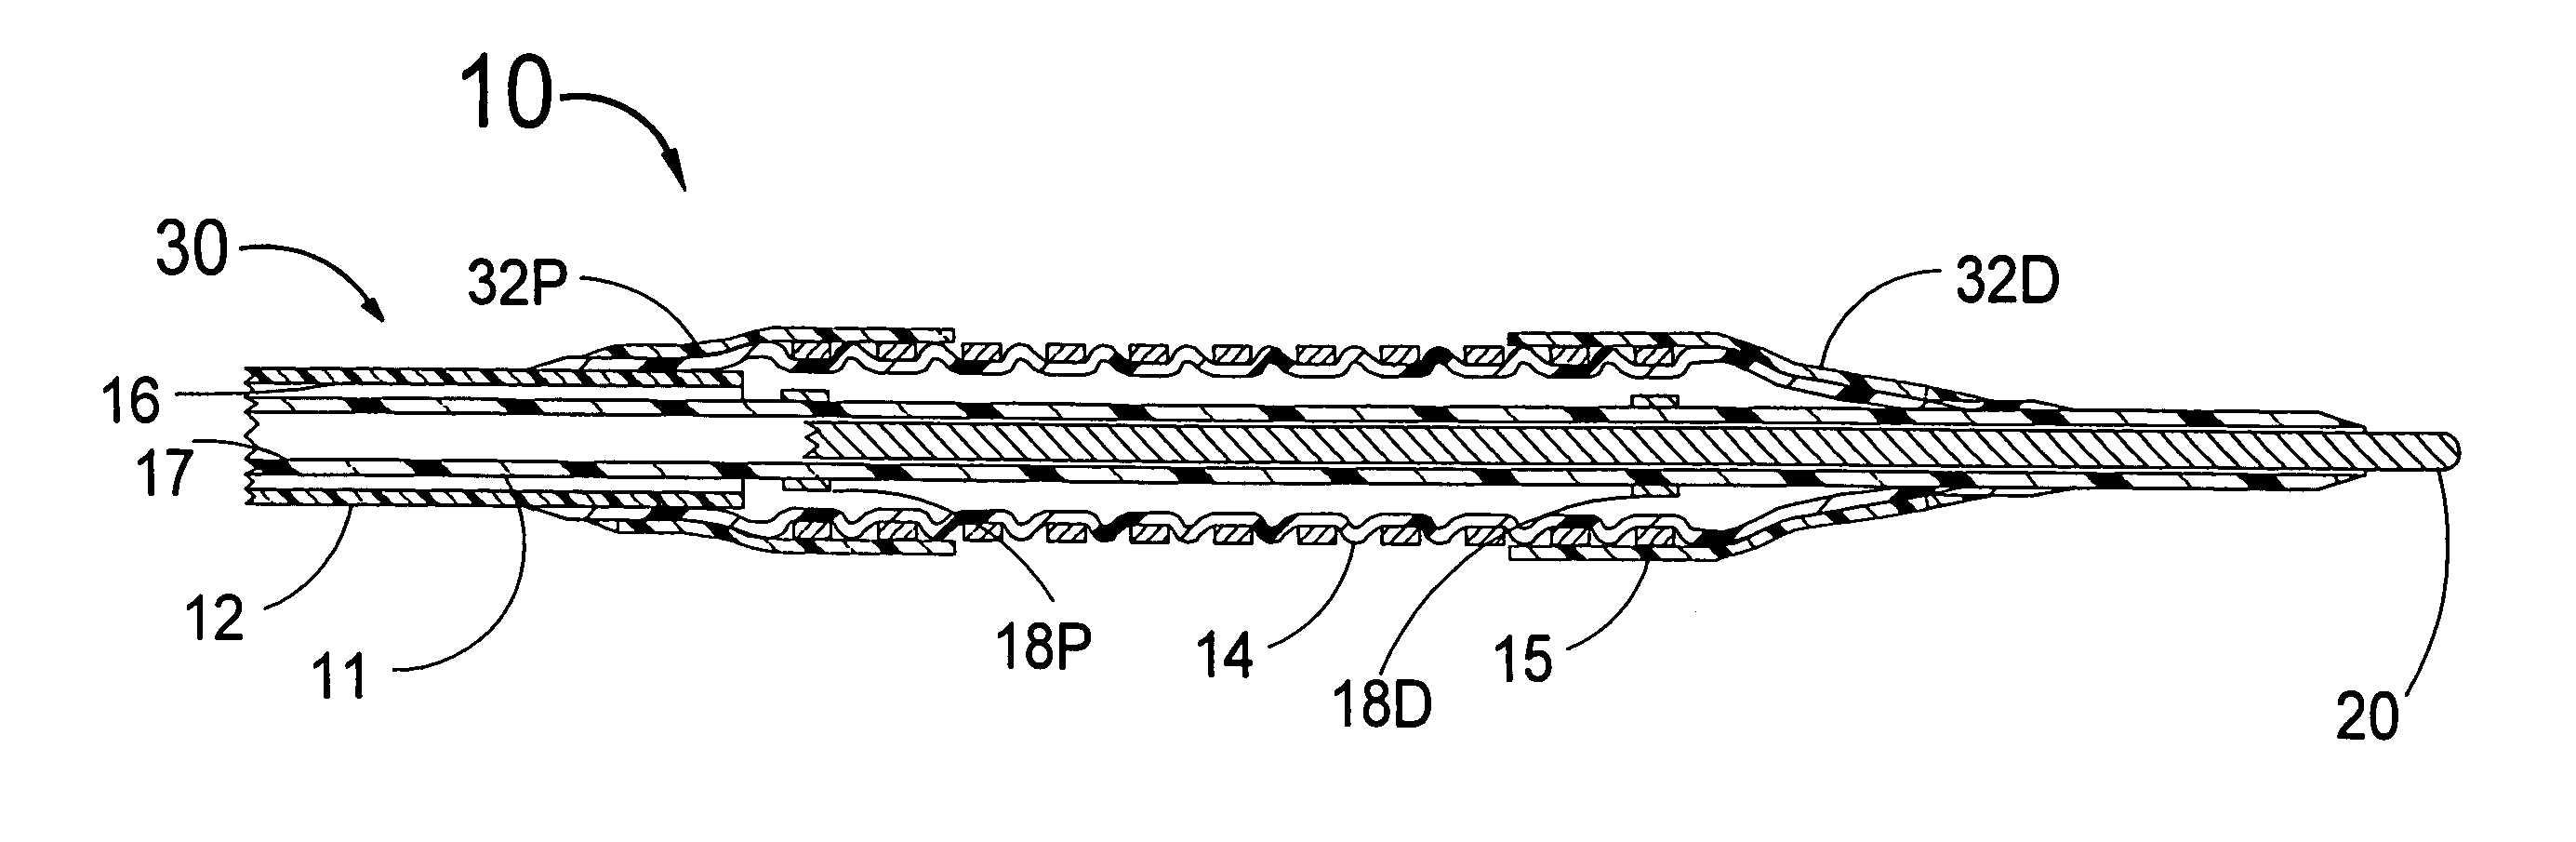 Stent with self-expanding end sections